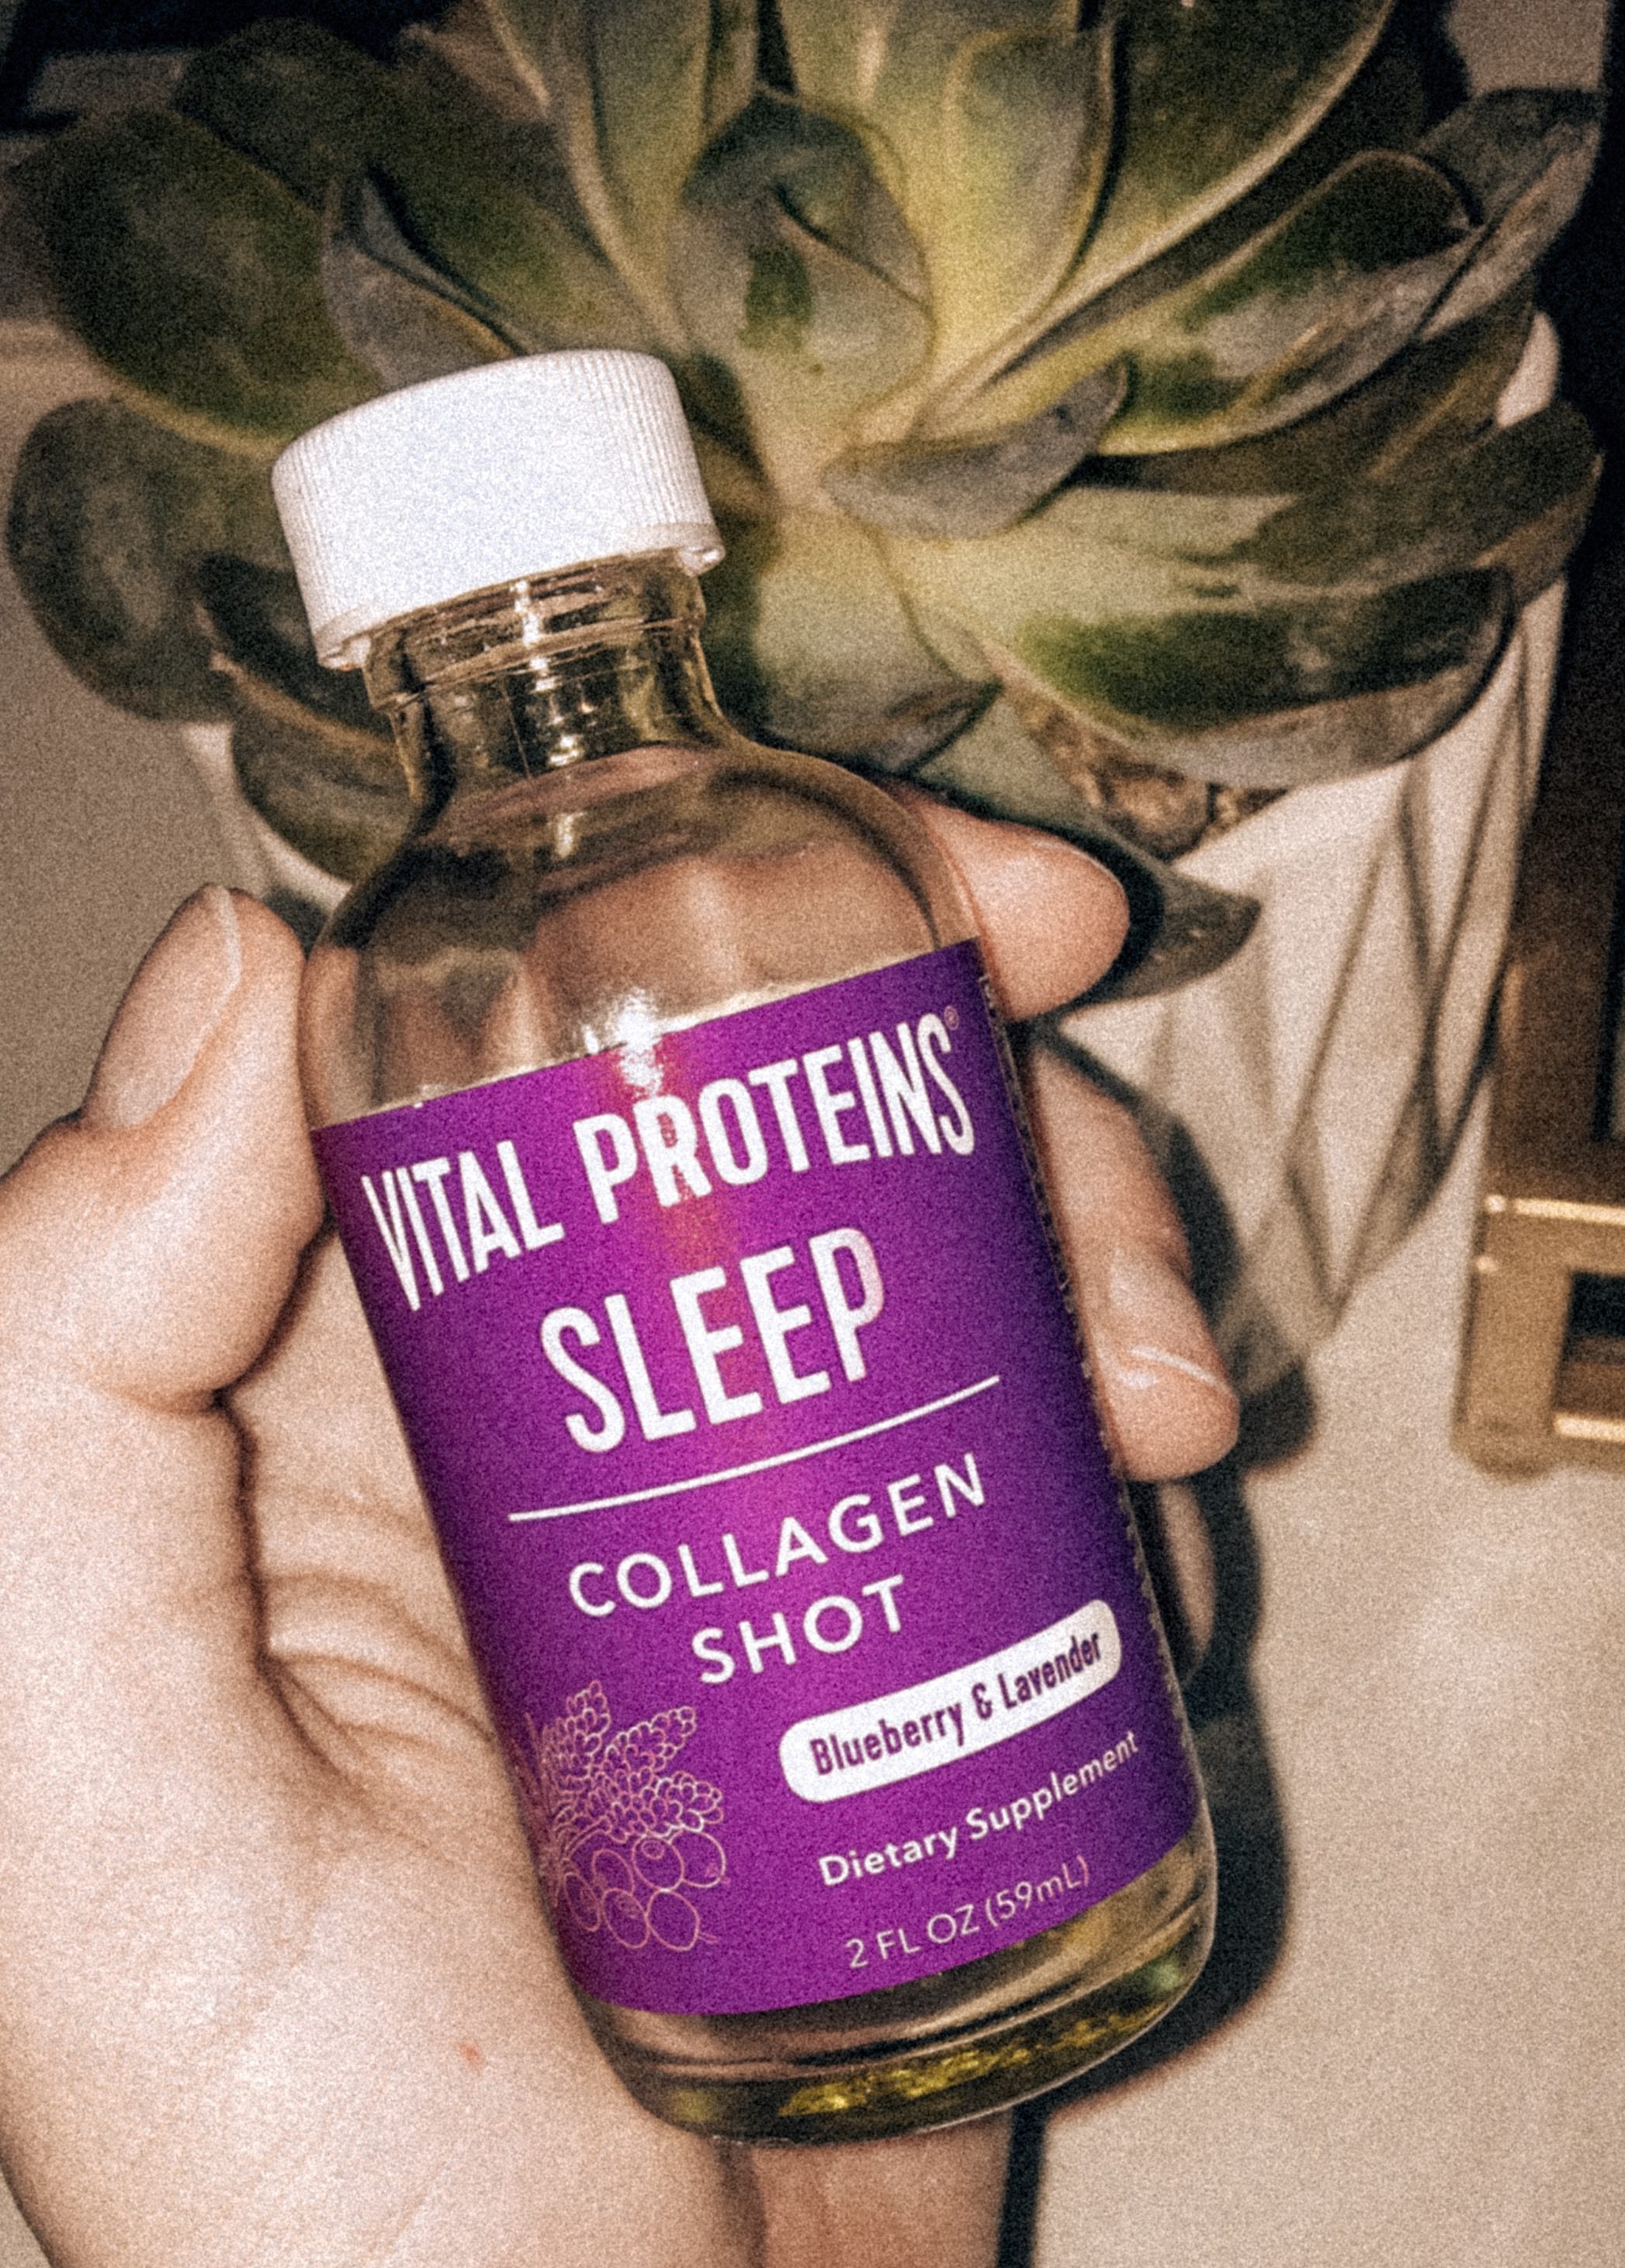 Read This Before You Buy - Vital Proteins Collagen Shots Review - Sleep Shot #vitalproteins #collagen #wellness #health #lifestyleblog #blogger #review #beauty